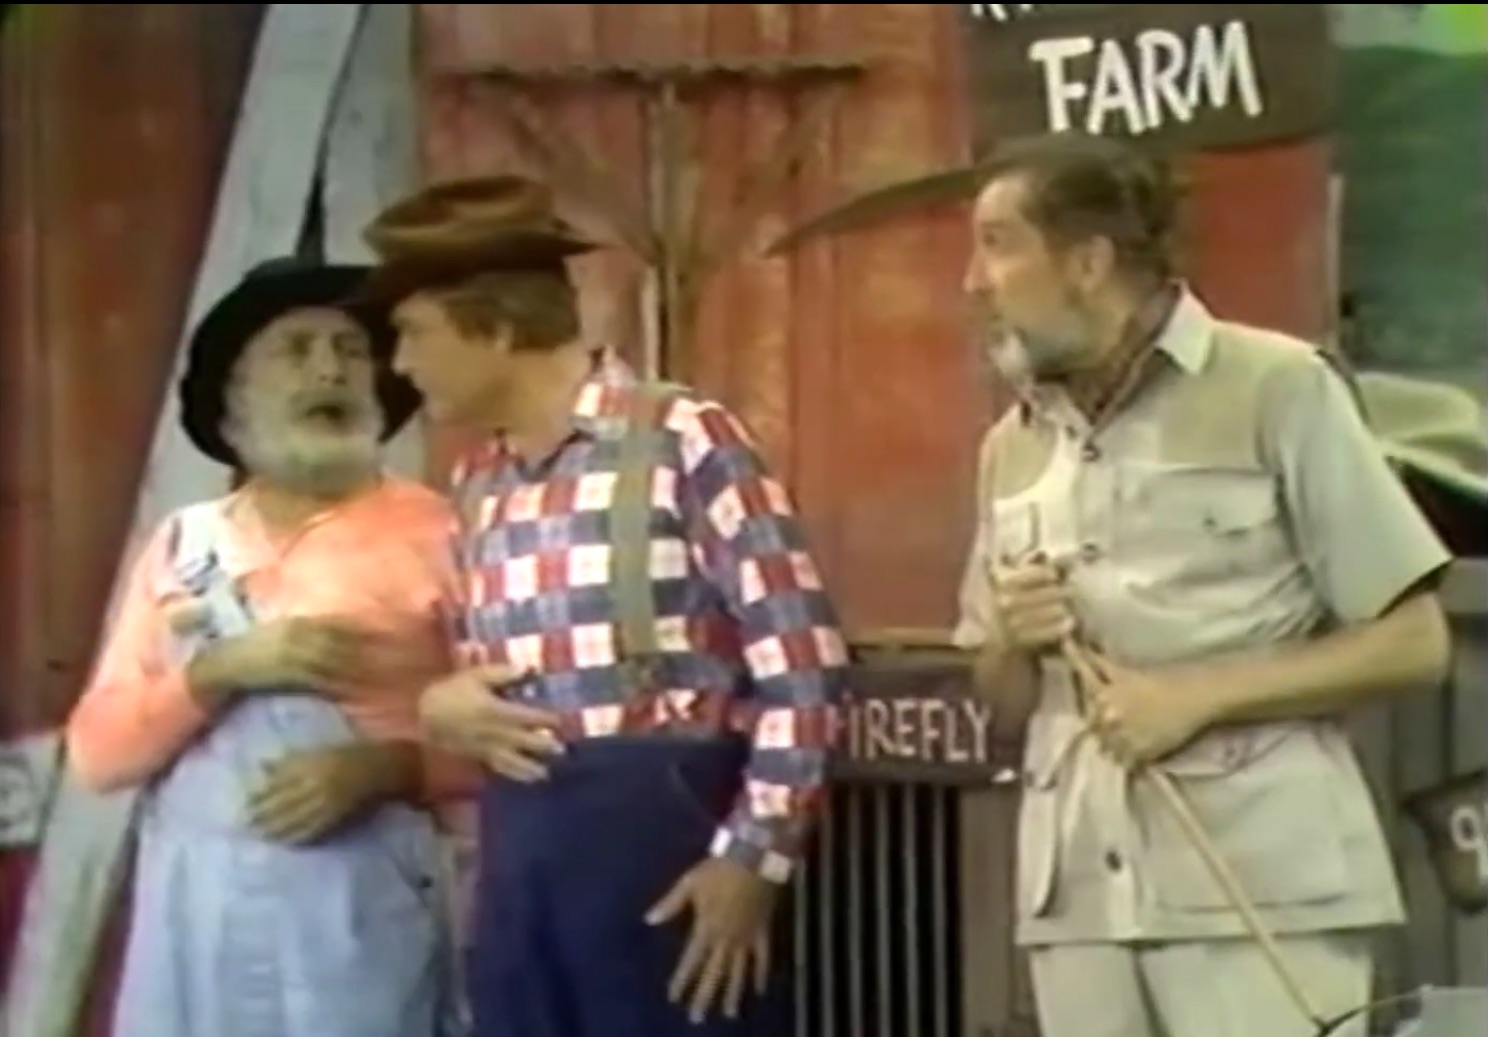 Pa Kadiddlehopper (Jan Arvan), his idiot son Clem (Red Skelton), and Dr. Flygrabber (Vincent Price) at the Kadiddlehopper farm in "Climb Upon My Knee, Dummy Boy"